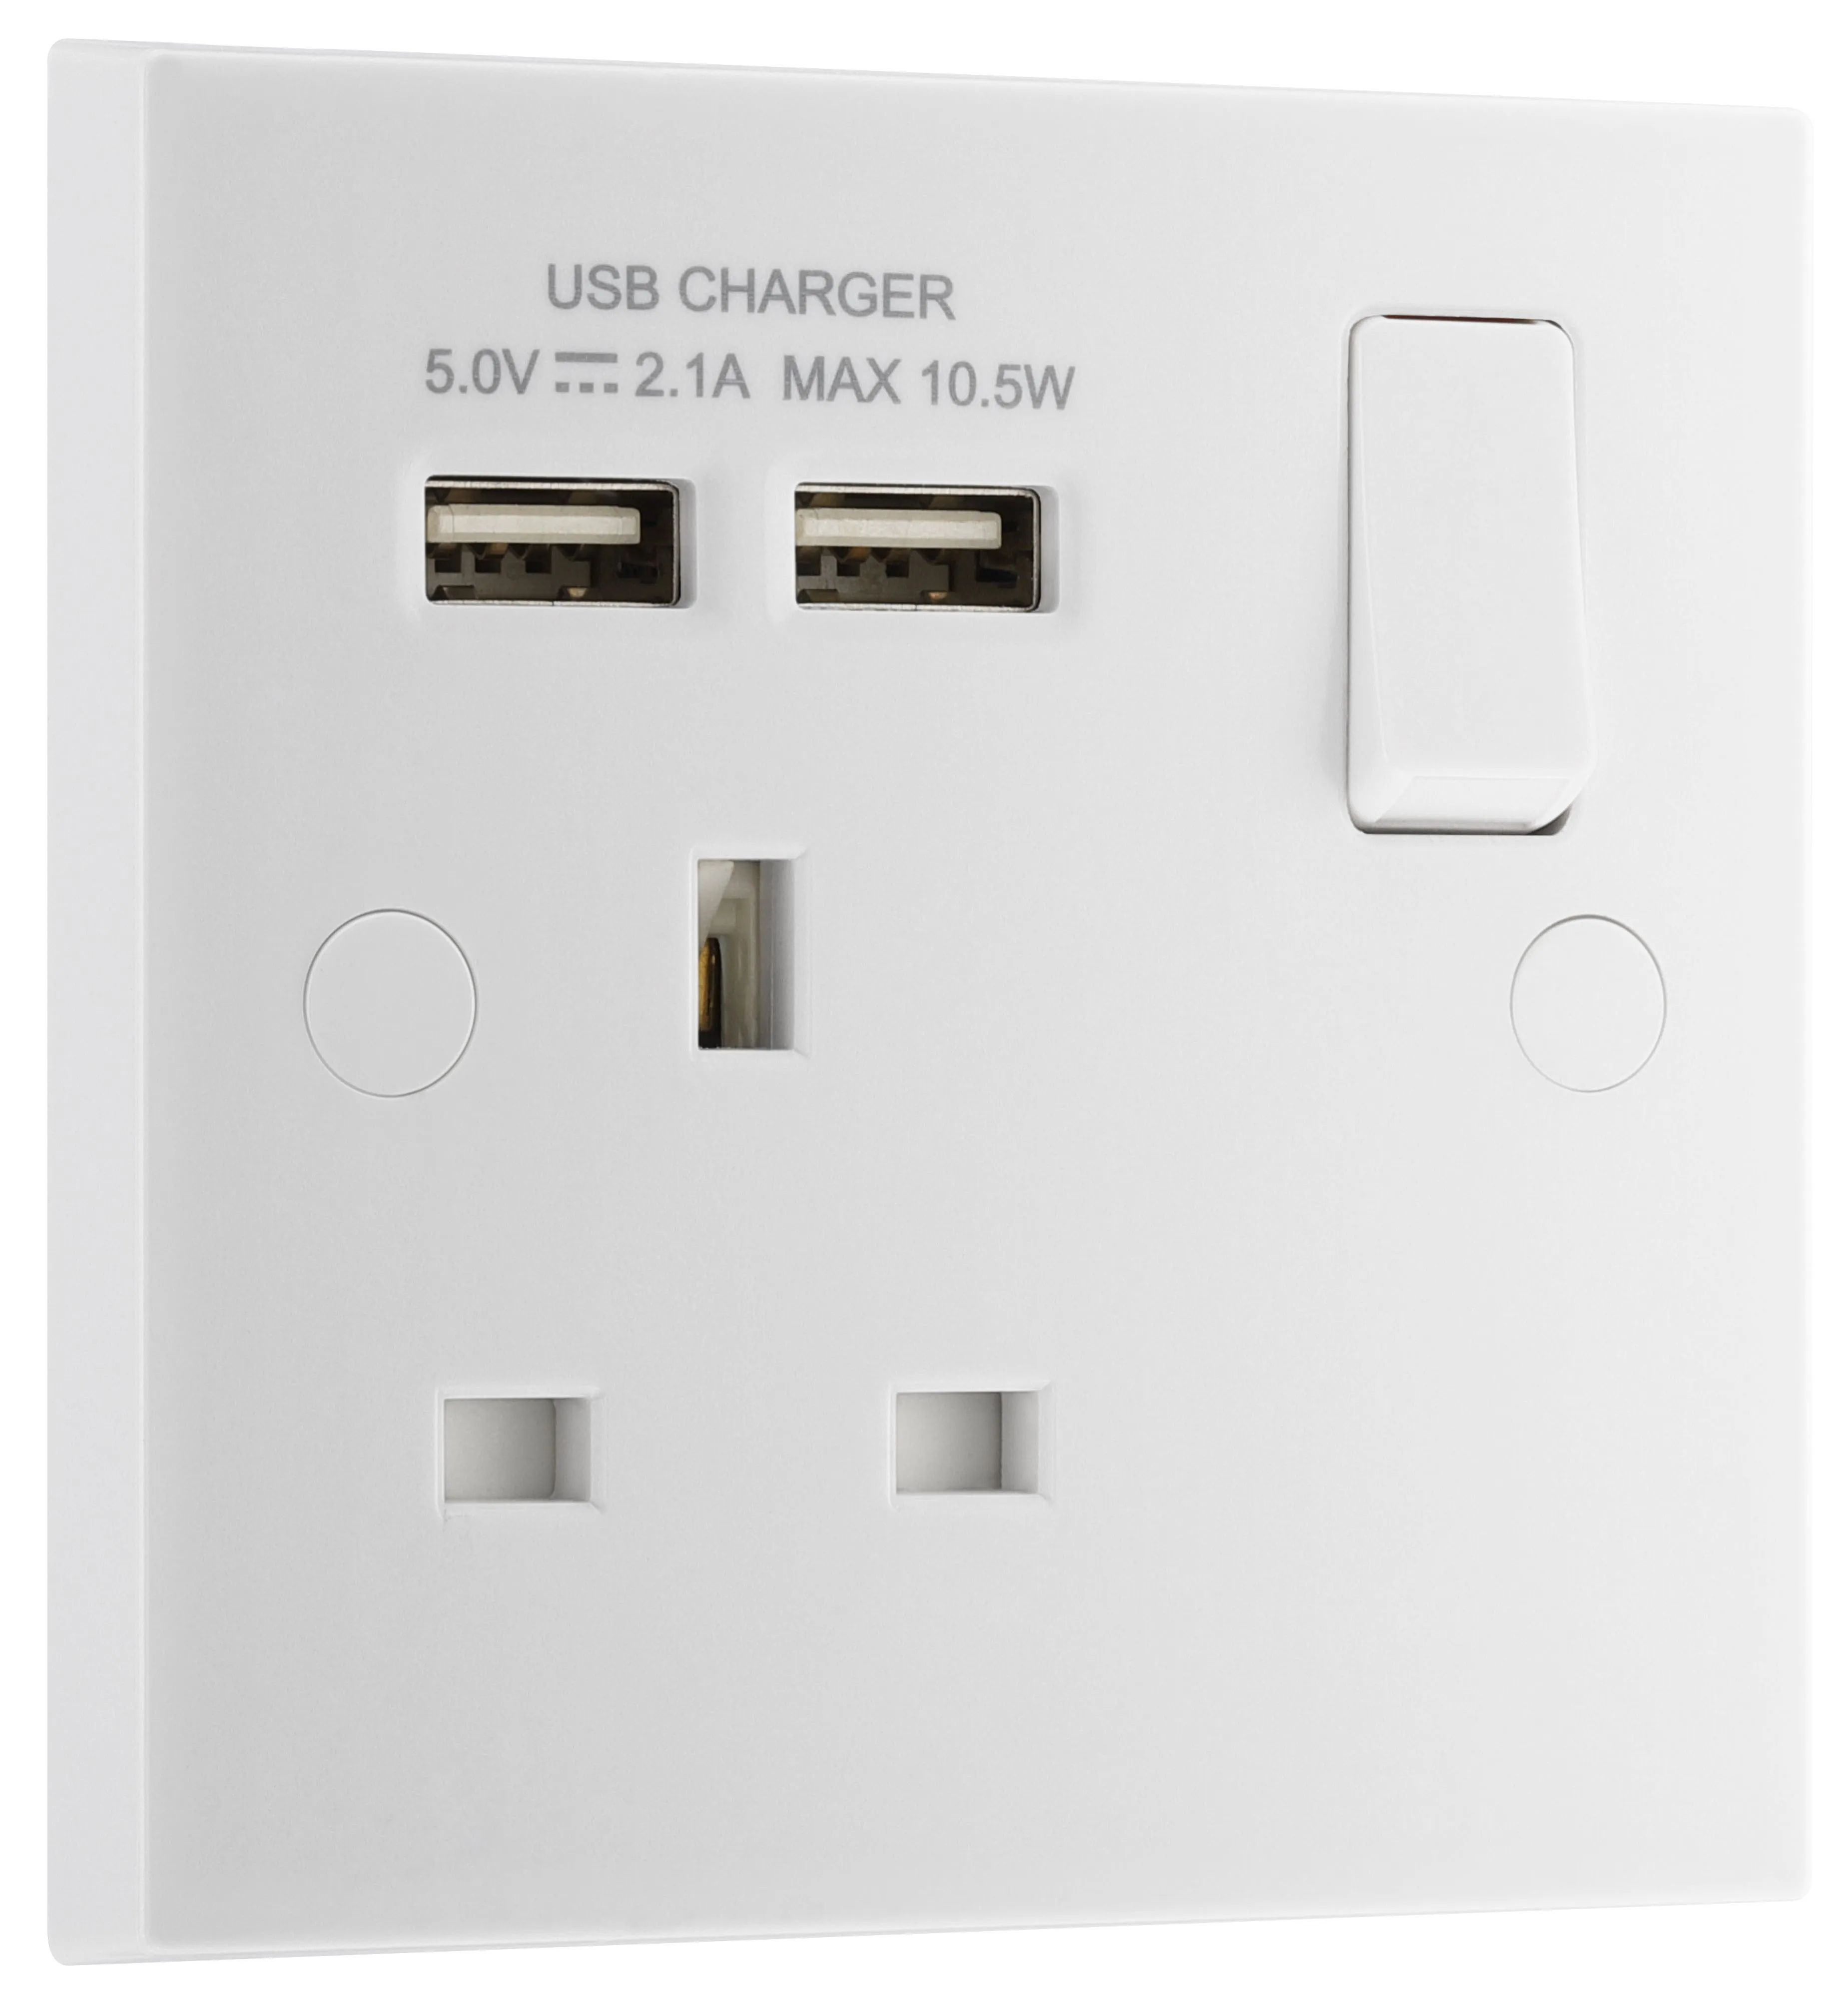 BG White Single 13A Switched Socket with USB x2 & White inserts